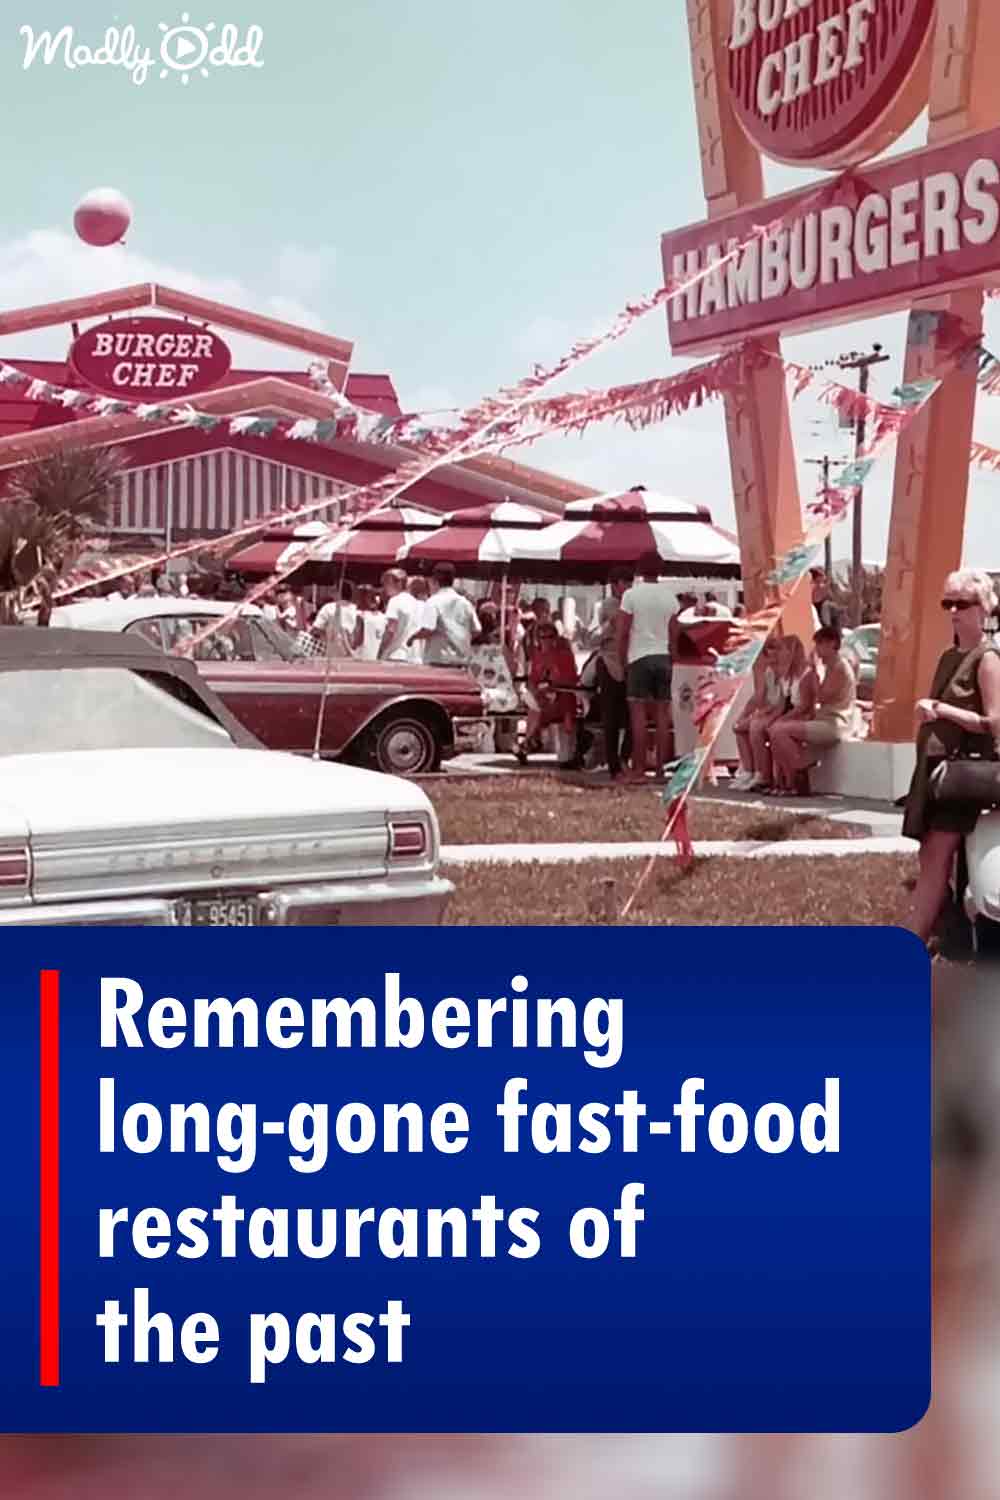 Remembering long-gone fast-food restaurants of the past